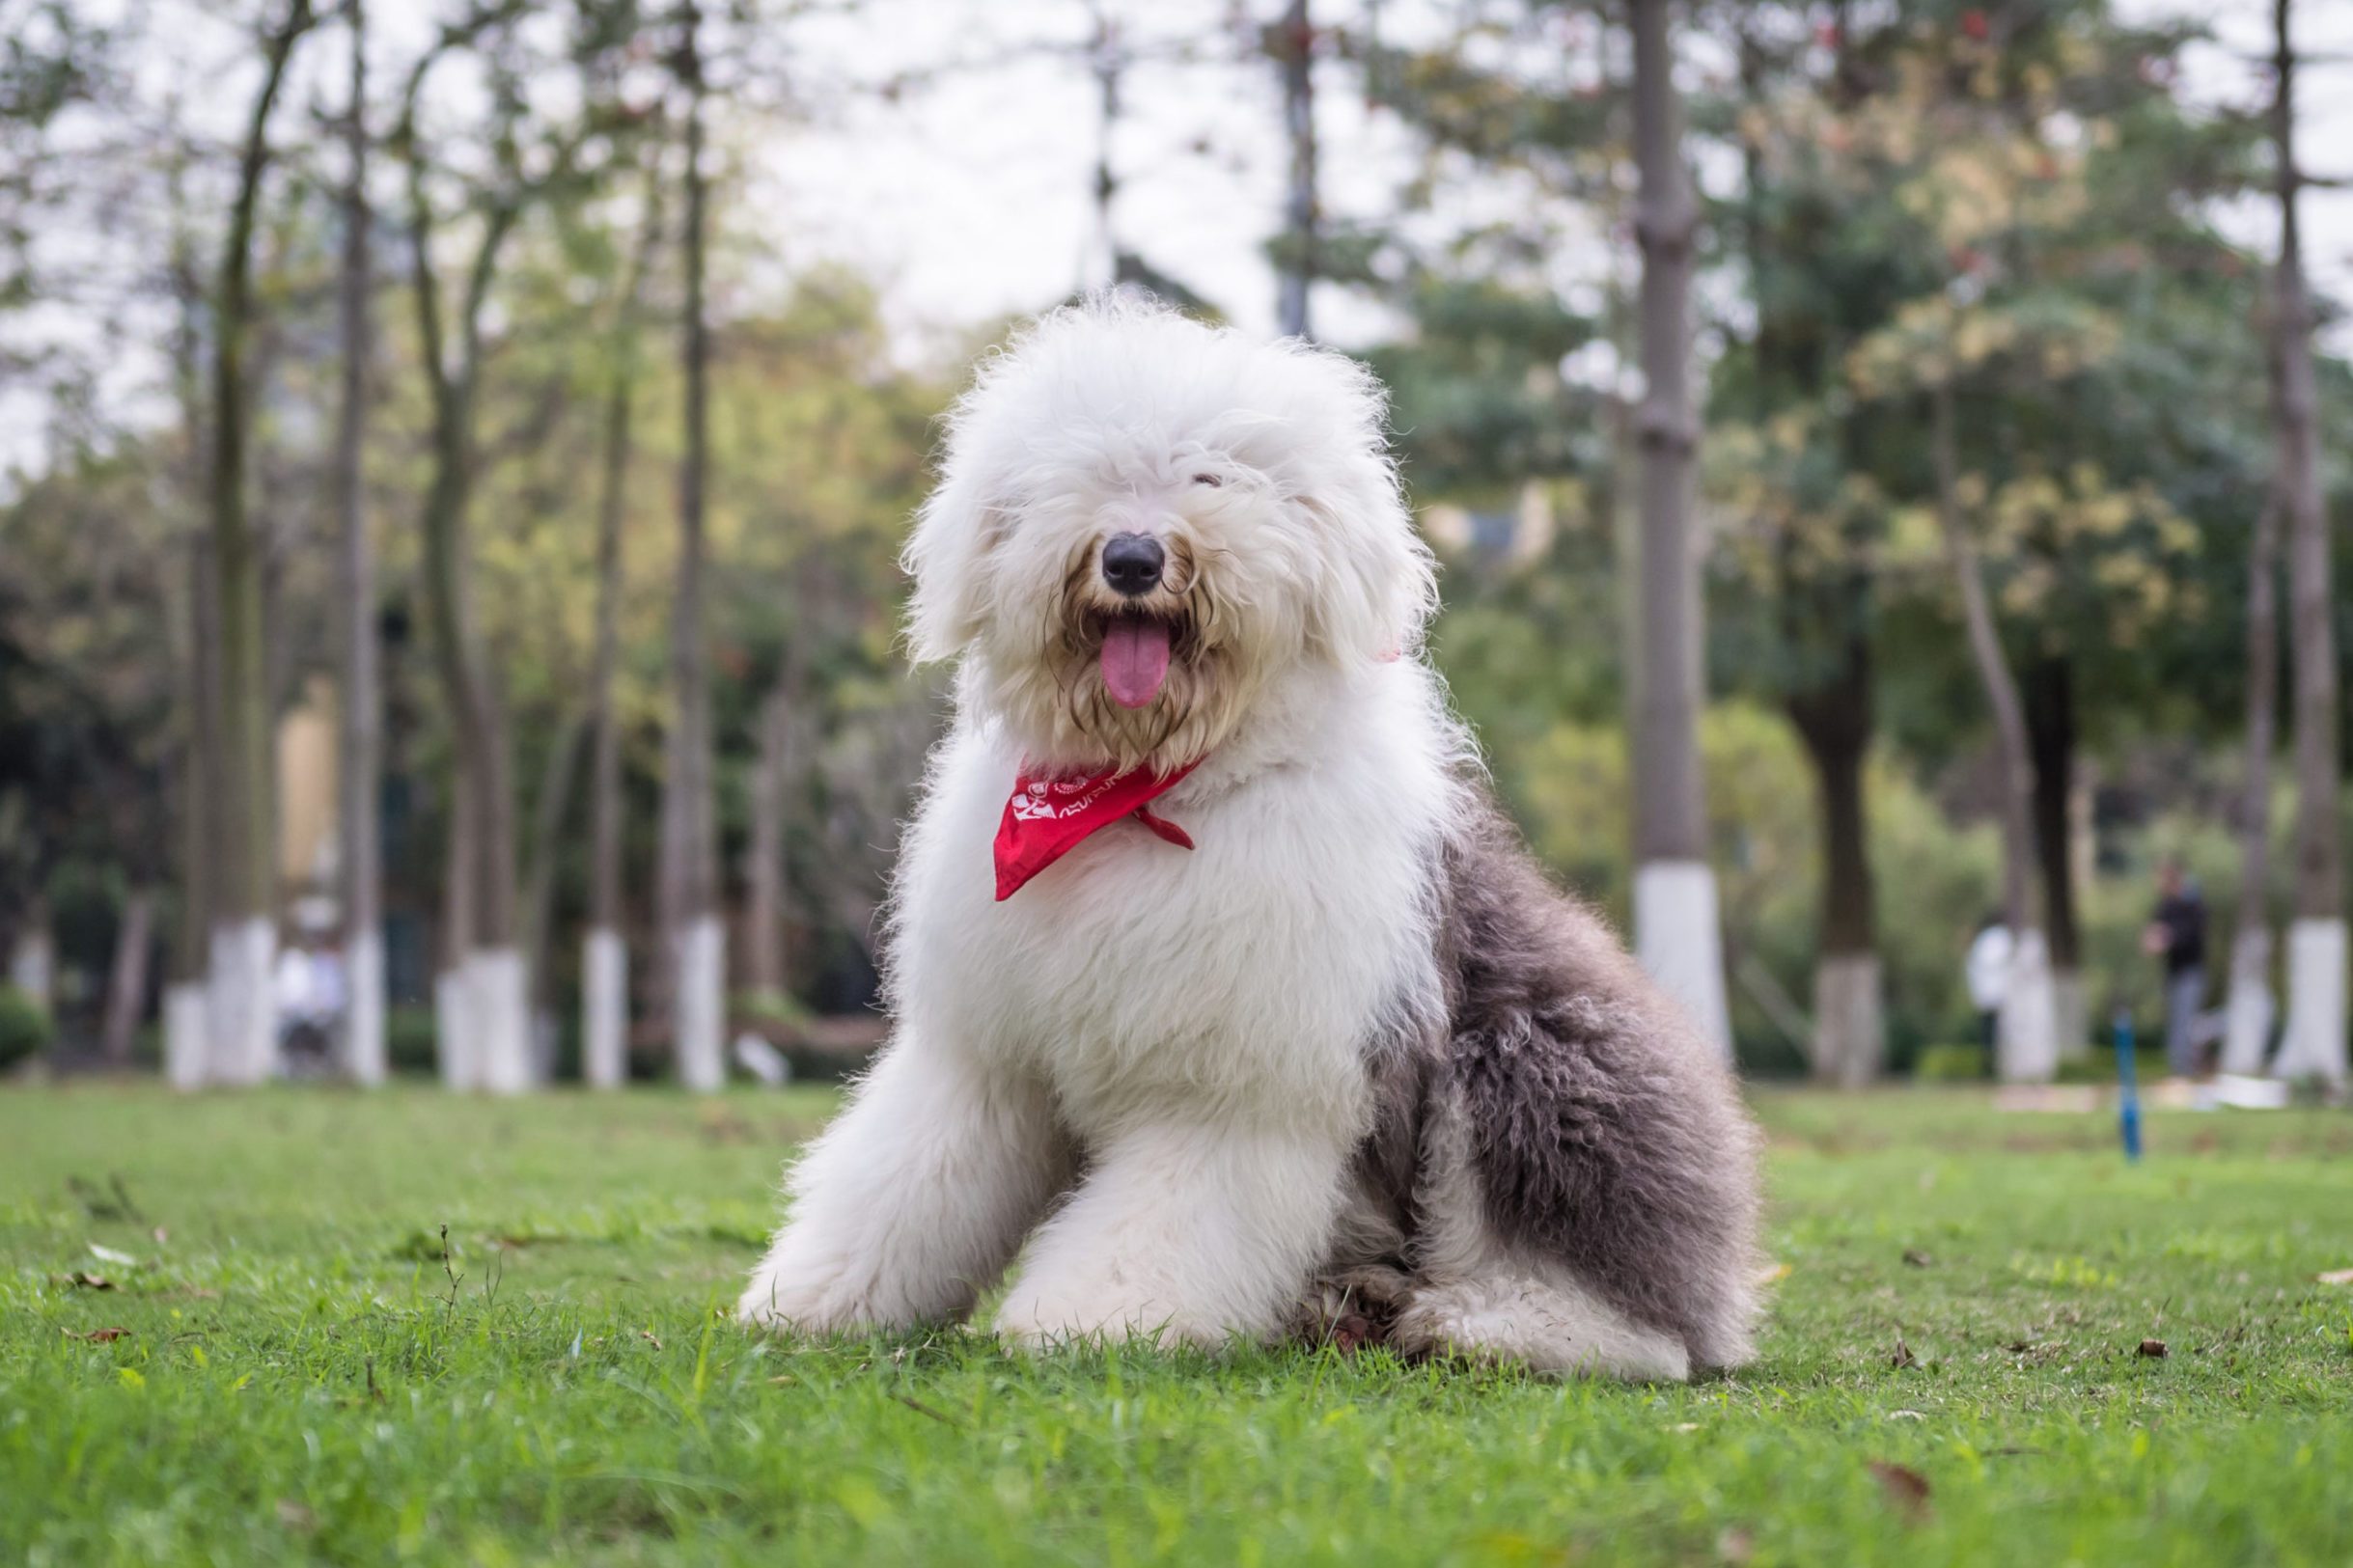 The Old English Sheepdog outdoors on the grass